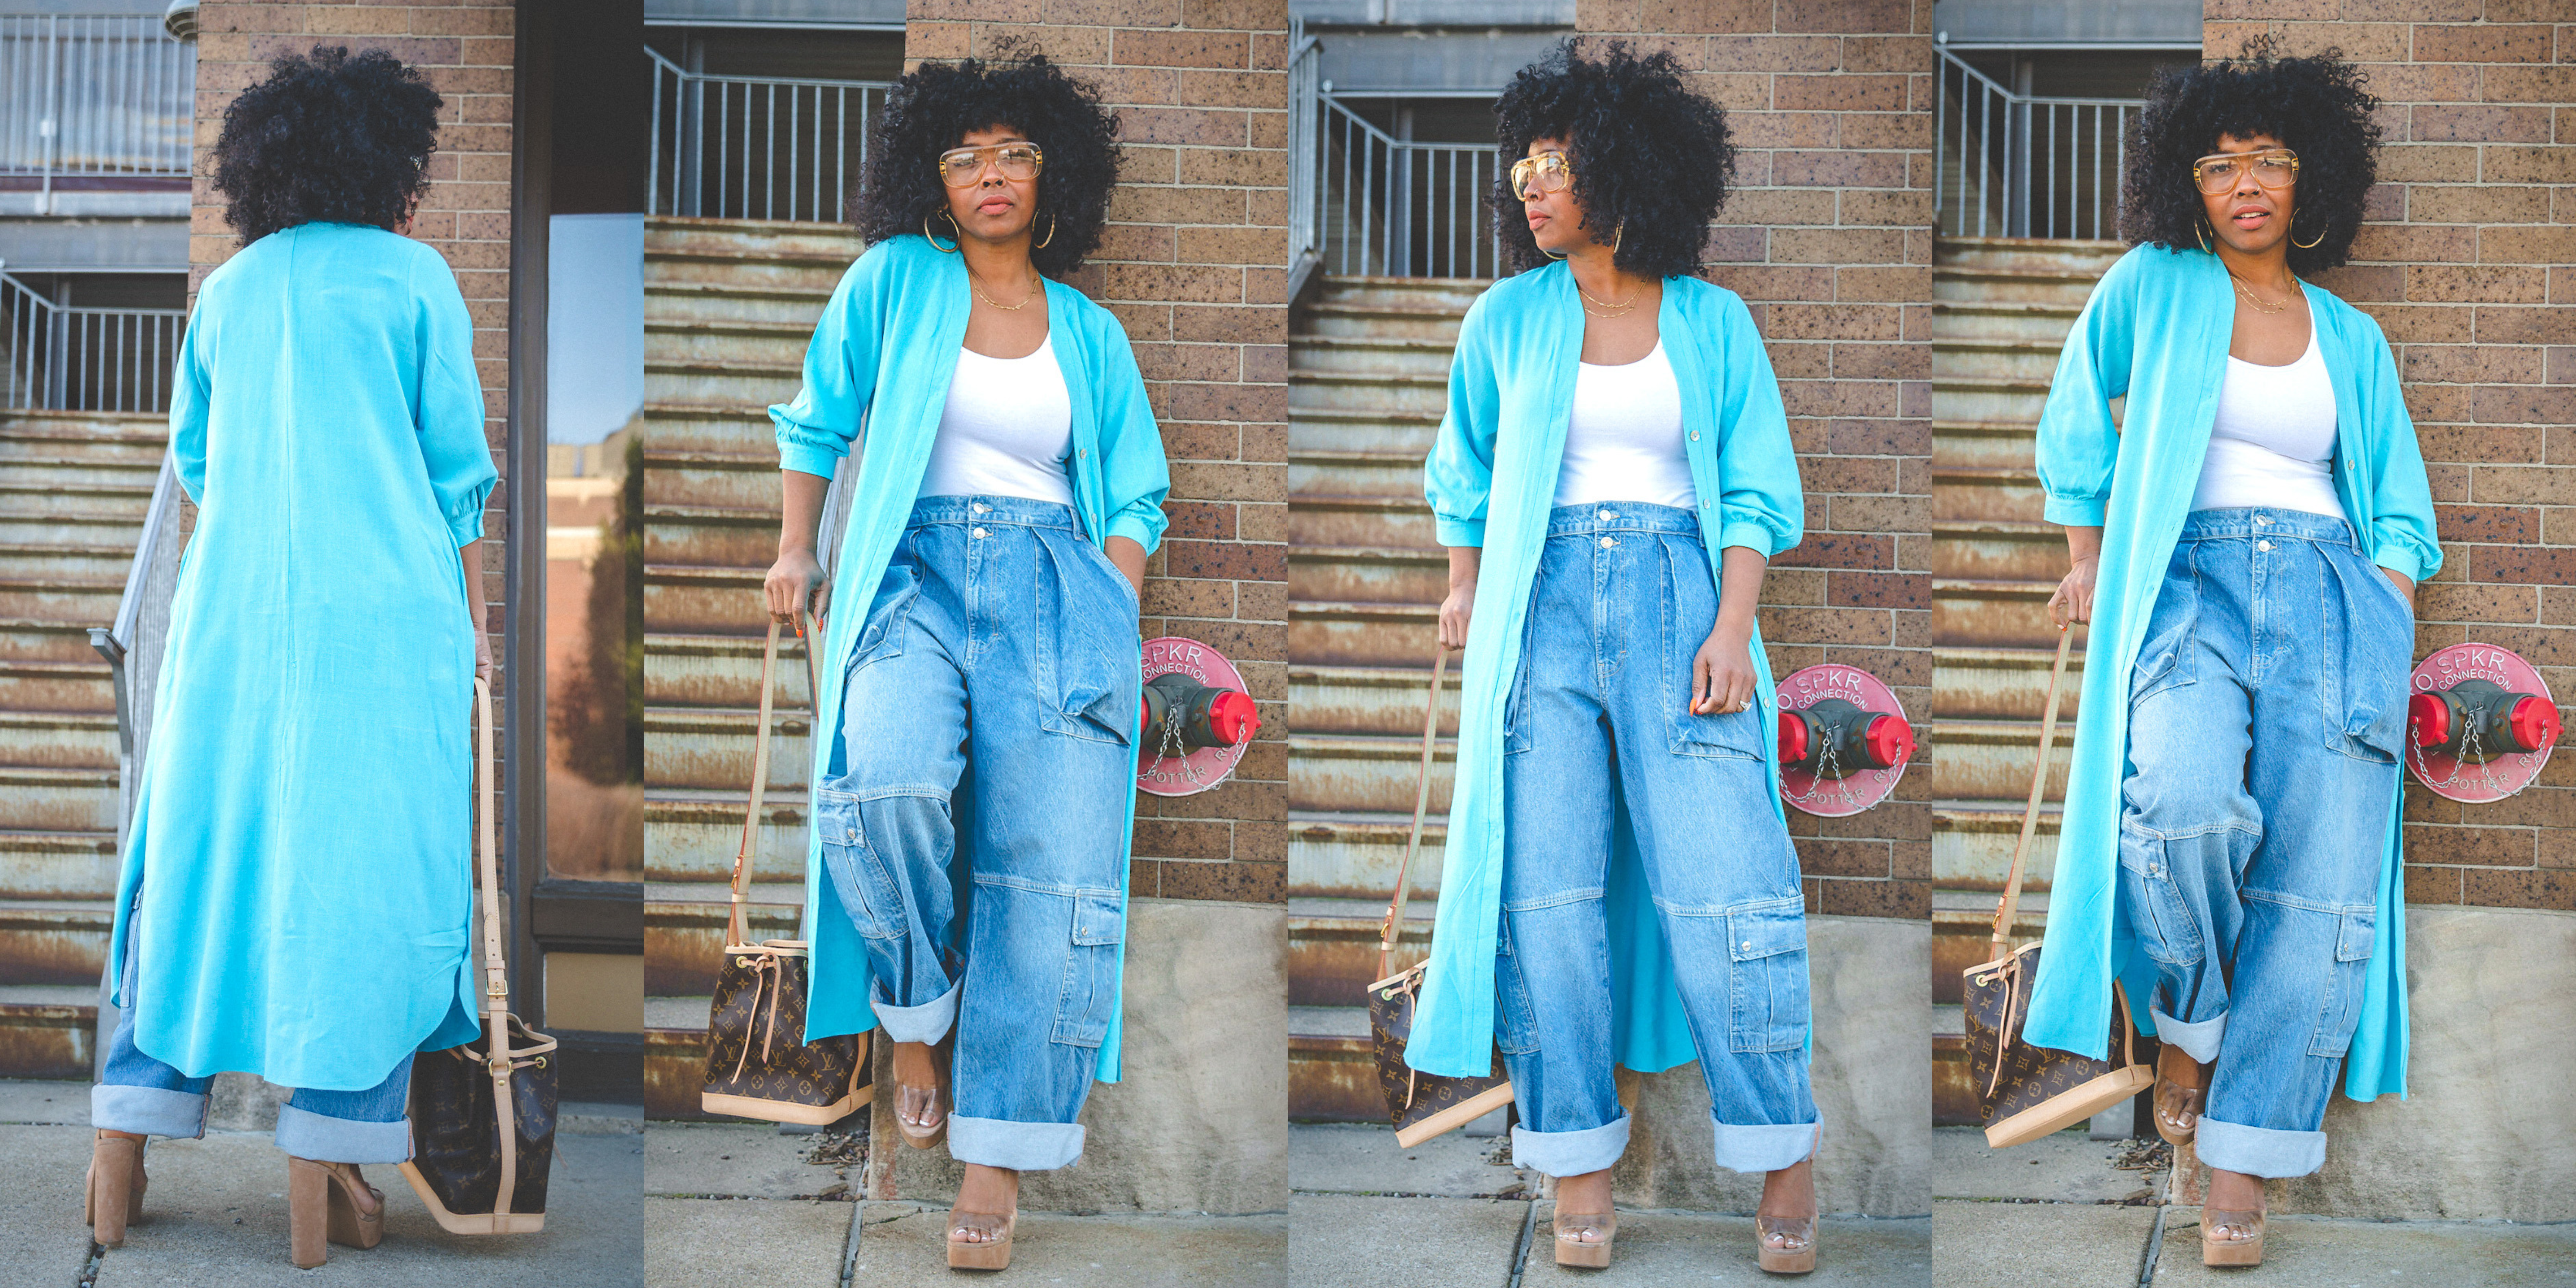 Sweenee Style, Spring Outfit Ideas, Free People Jeans, How to wear Denim Cargo Jeans, Louis Vuitton, Black Girls who Blog, Fashion Influencer, Indianapolis Fashion Blog, womans fashion for winter outfits, outfit ideas, outfit inspiration, outfits fashion, outfit, outfit casual, outfit fashion, outfits ideas, outfit idea, outfit